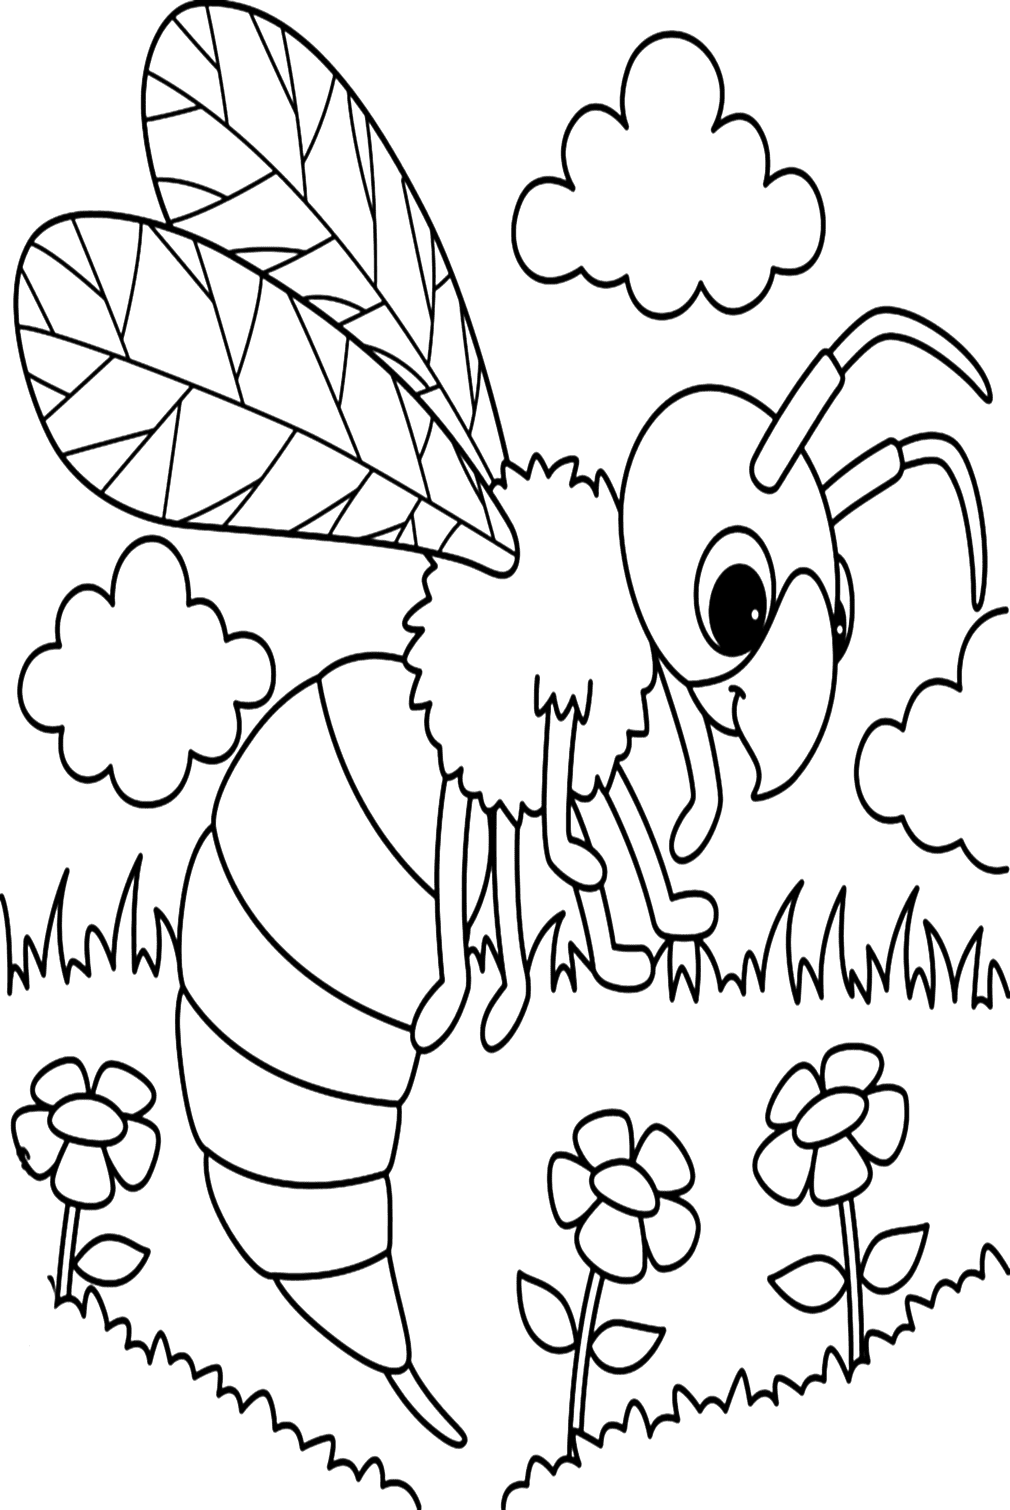 Paper Wasp Coloring Page from Wasp